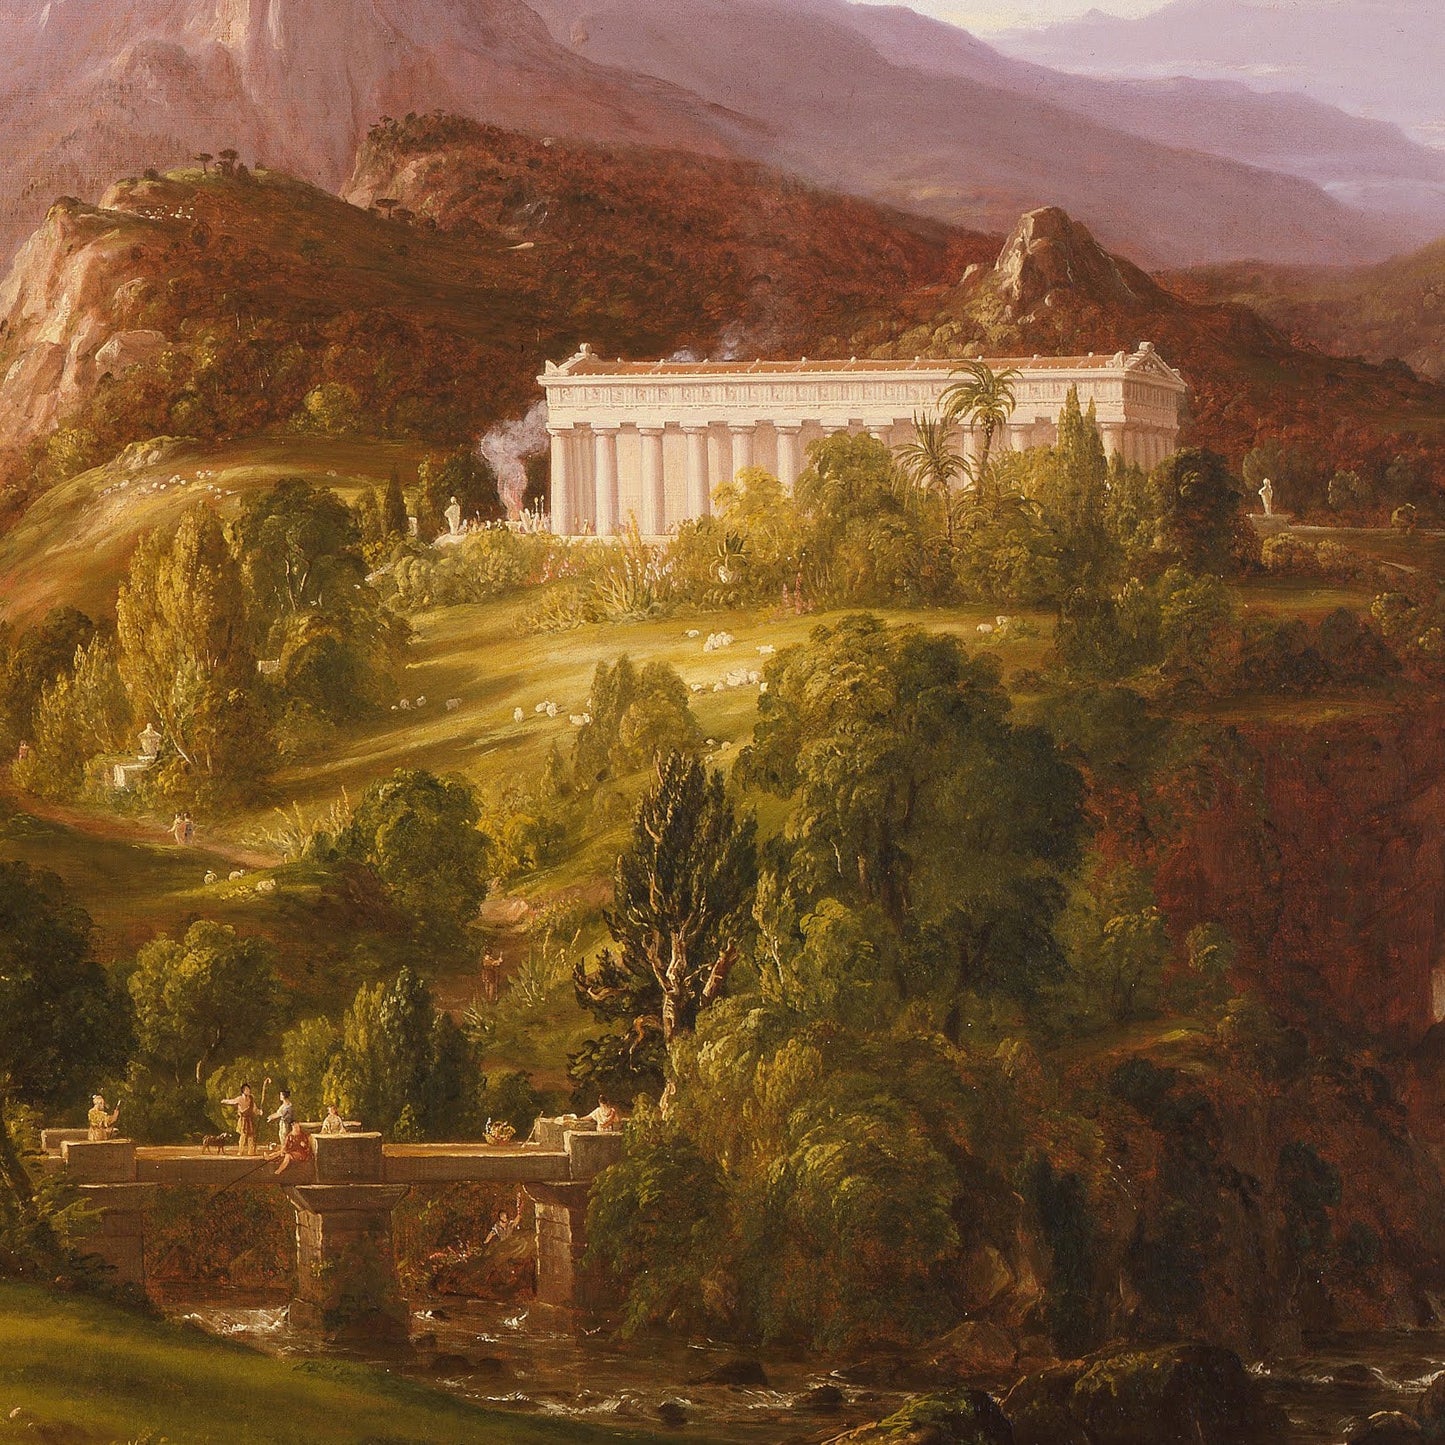 Dream of Arcadia by Thomas Cole, 3d Printed with texture and brush strokes looks like original oil-painting, code:162